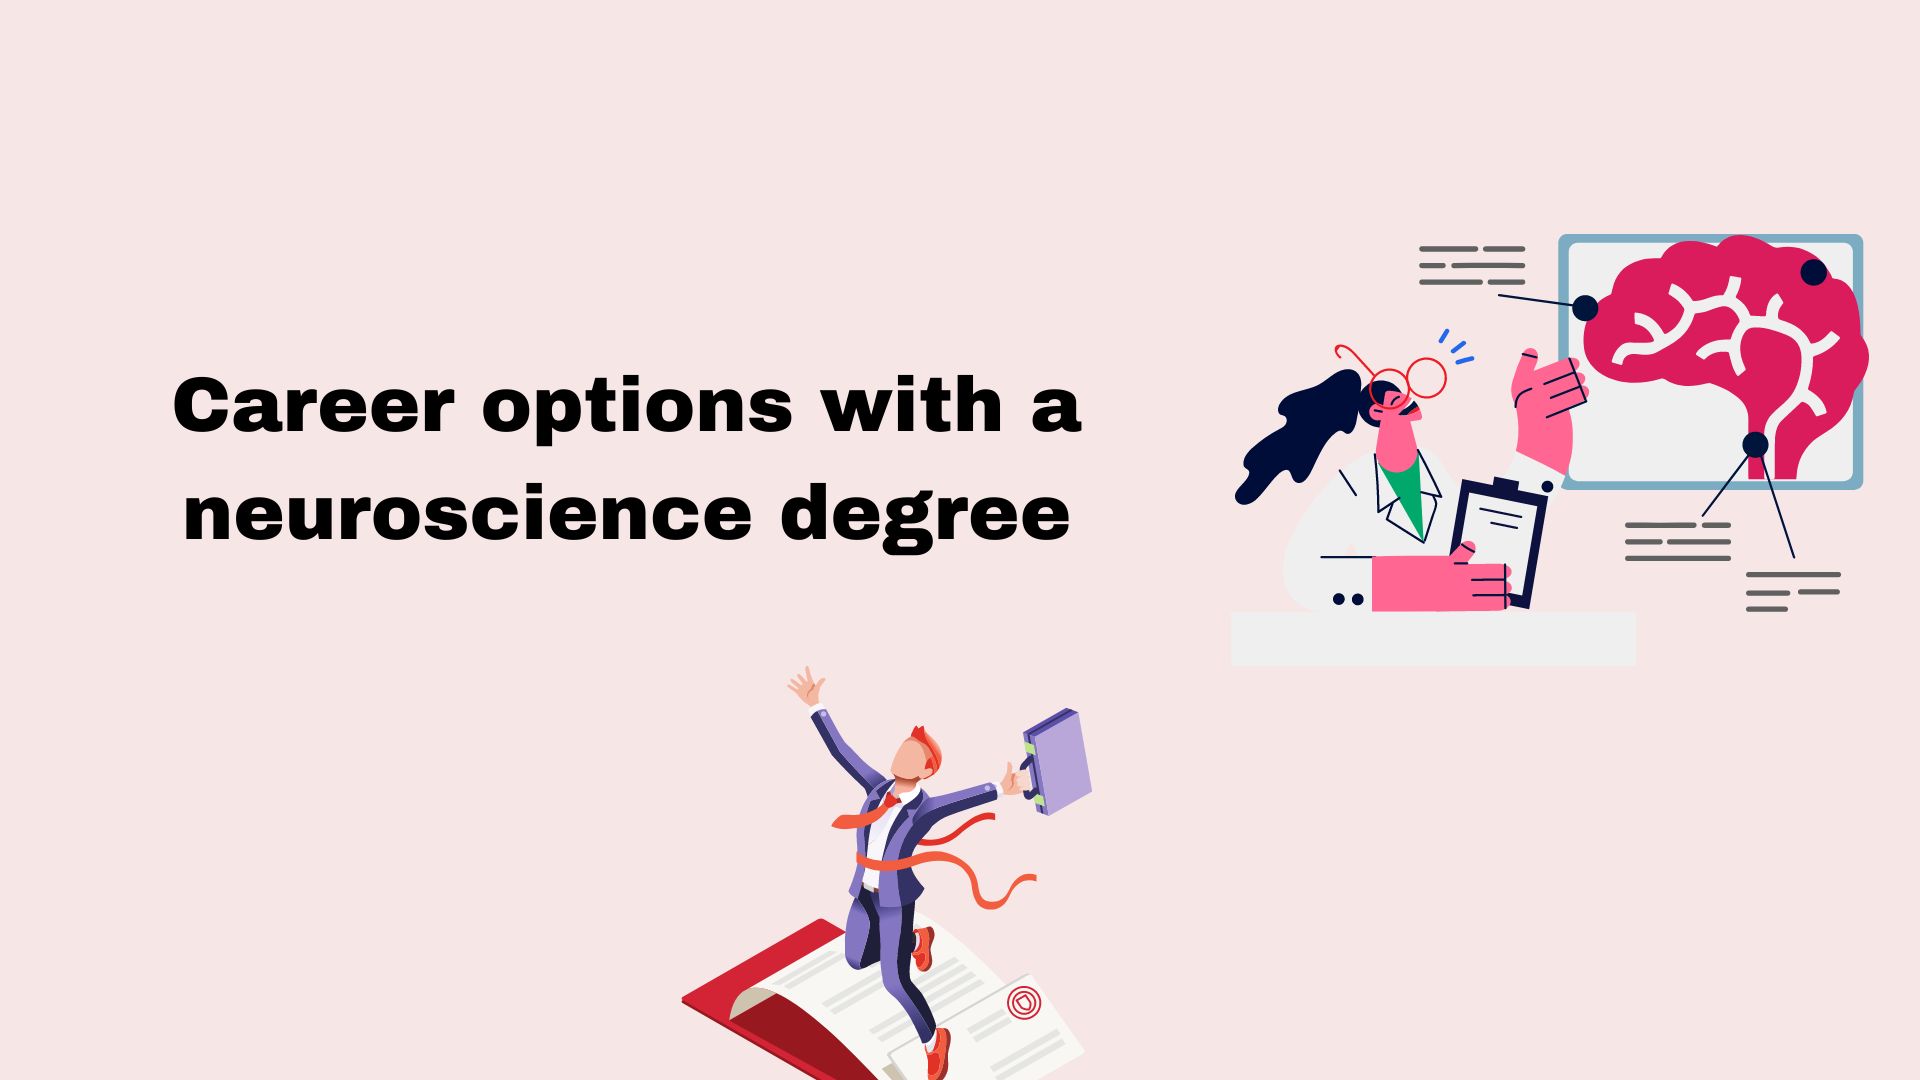 Career options with a neuroscience degree